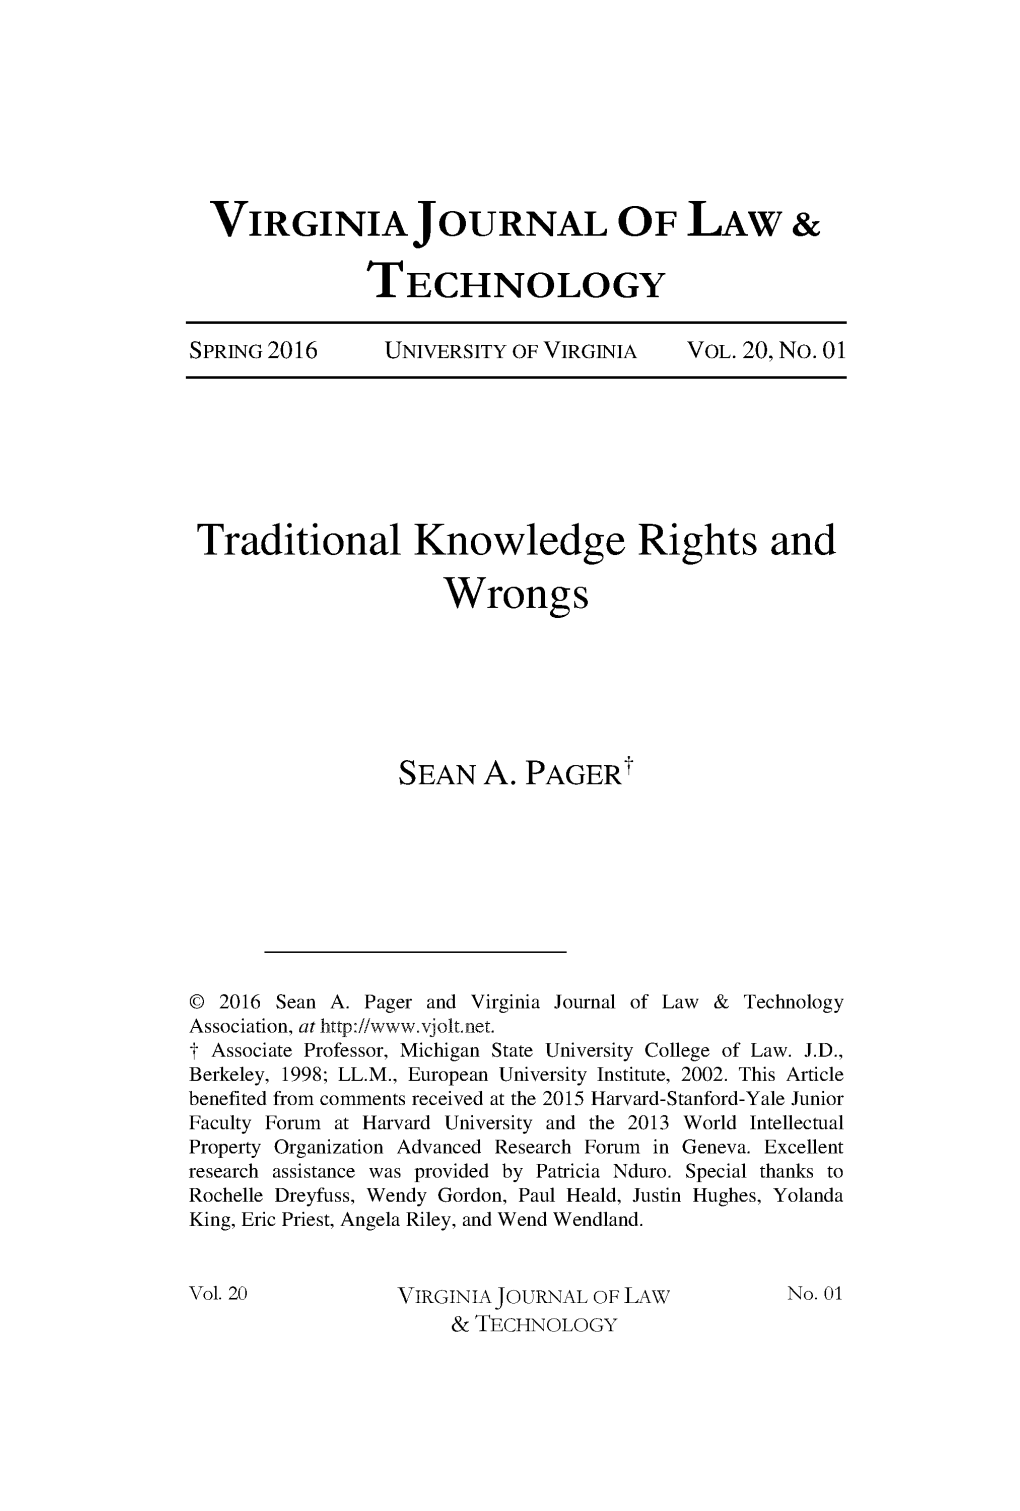 Traditional Knowledge Rights and Wrongs